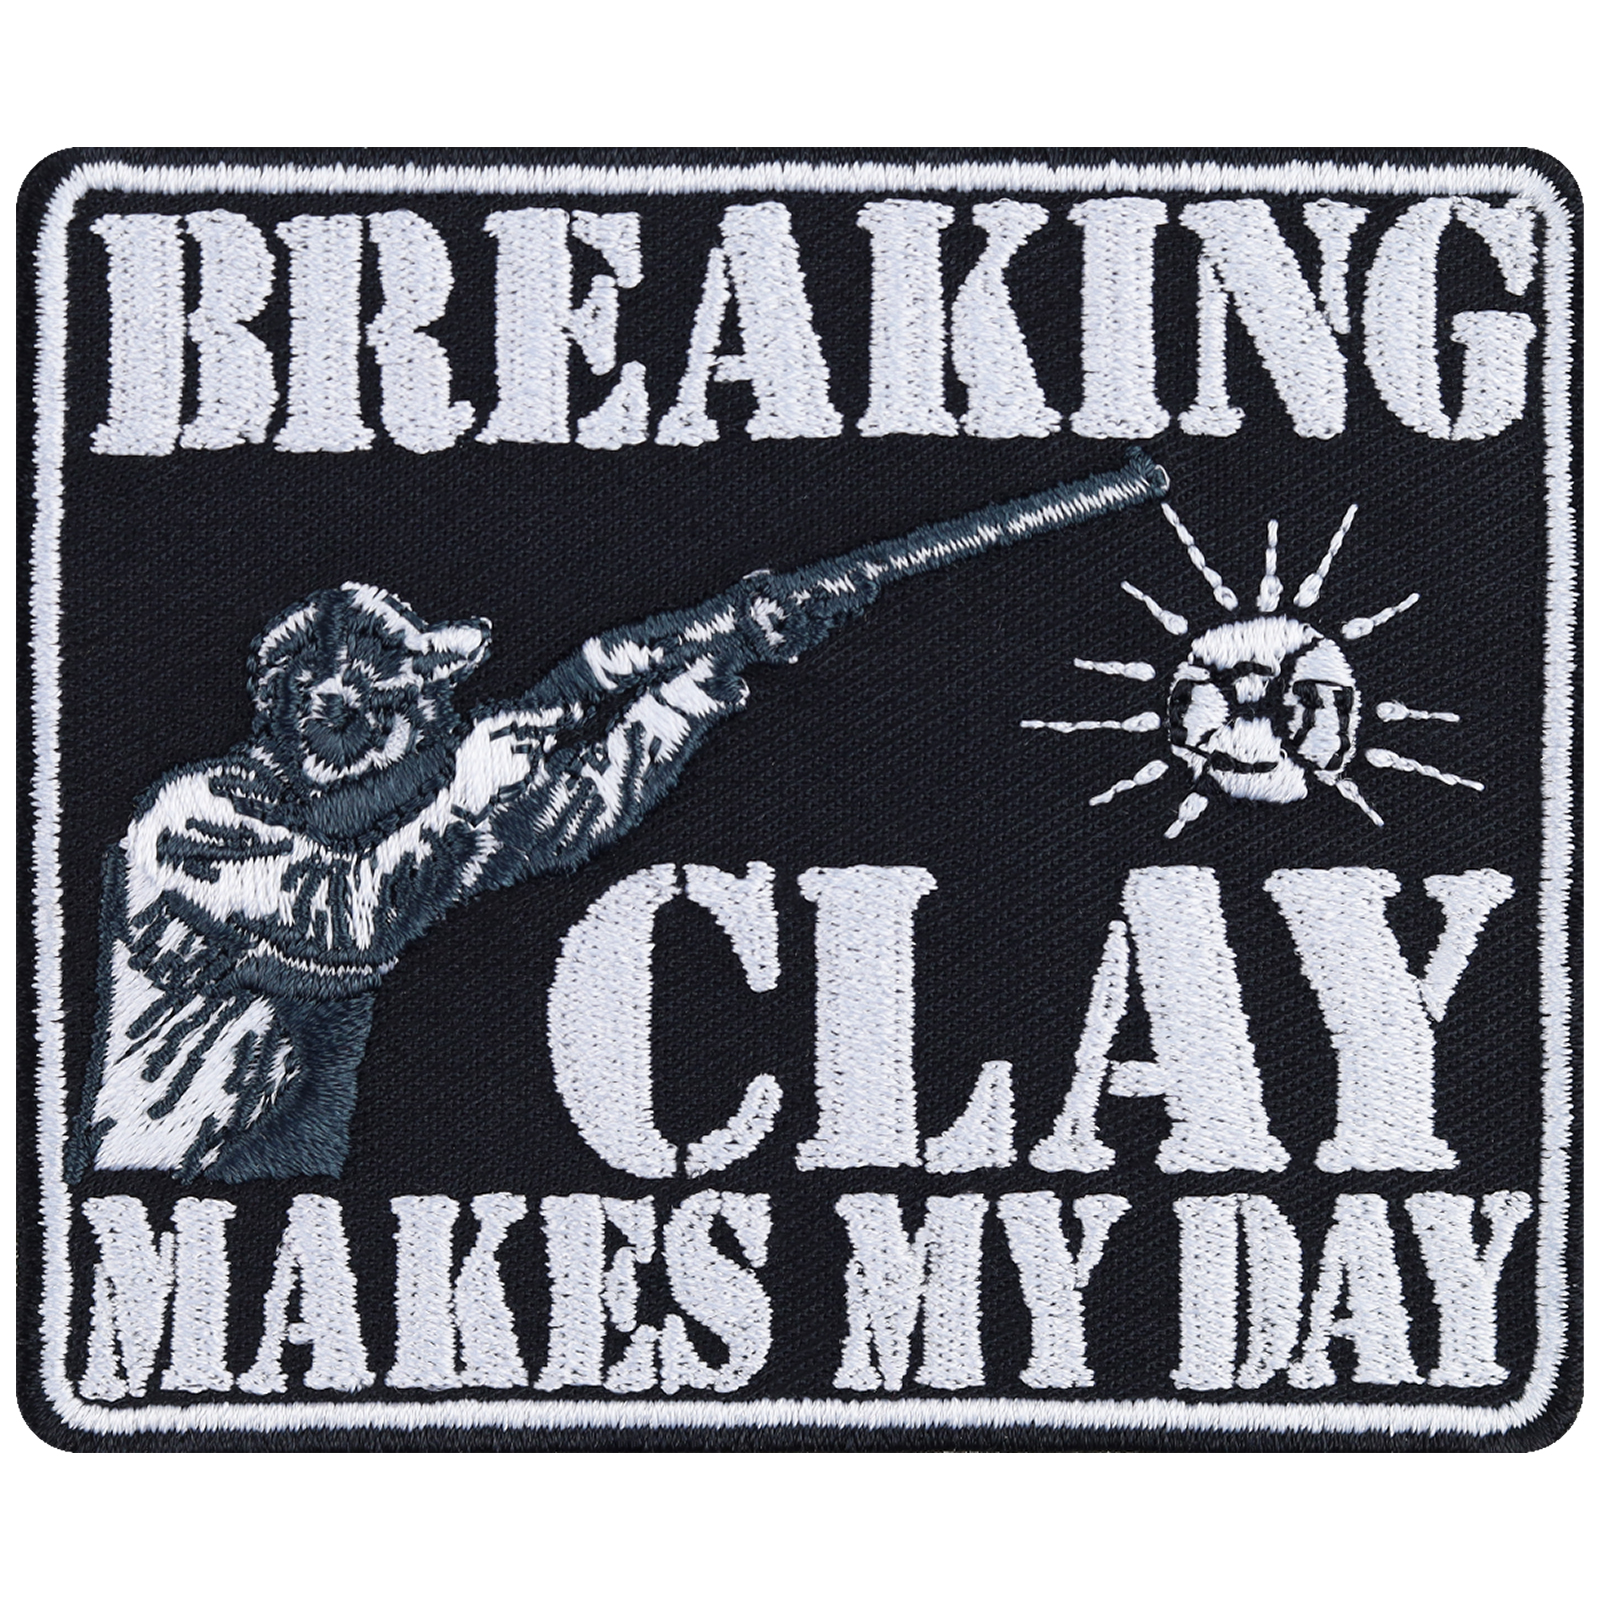 Breaking clay makes my day - Patch